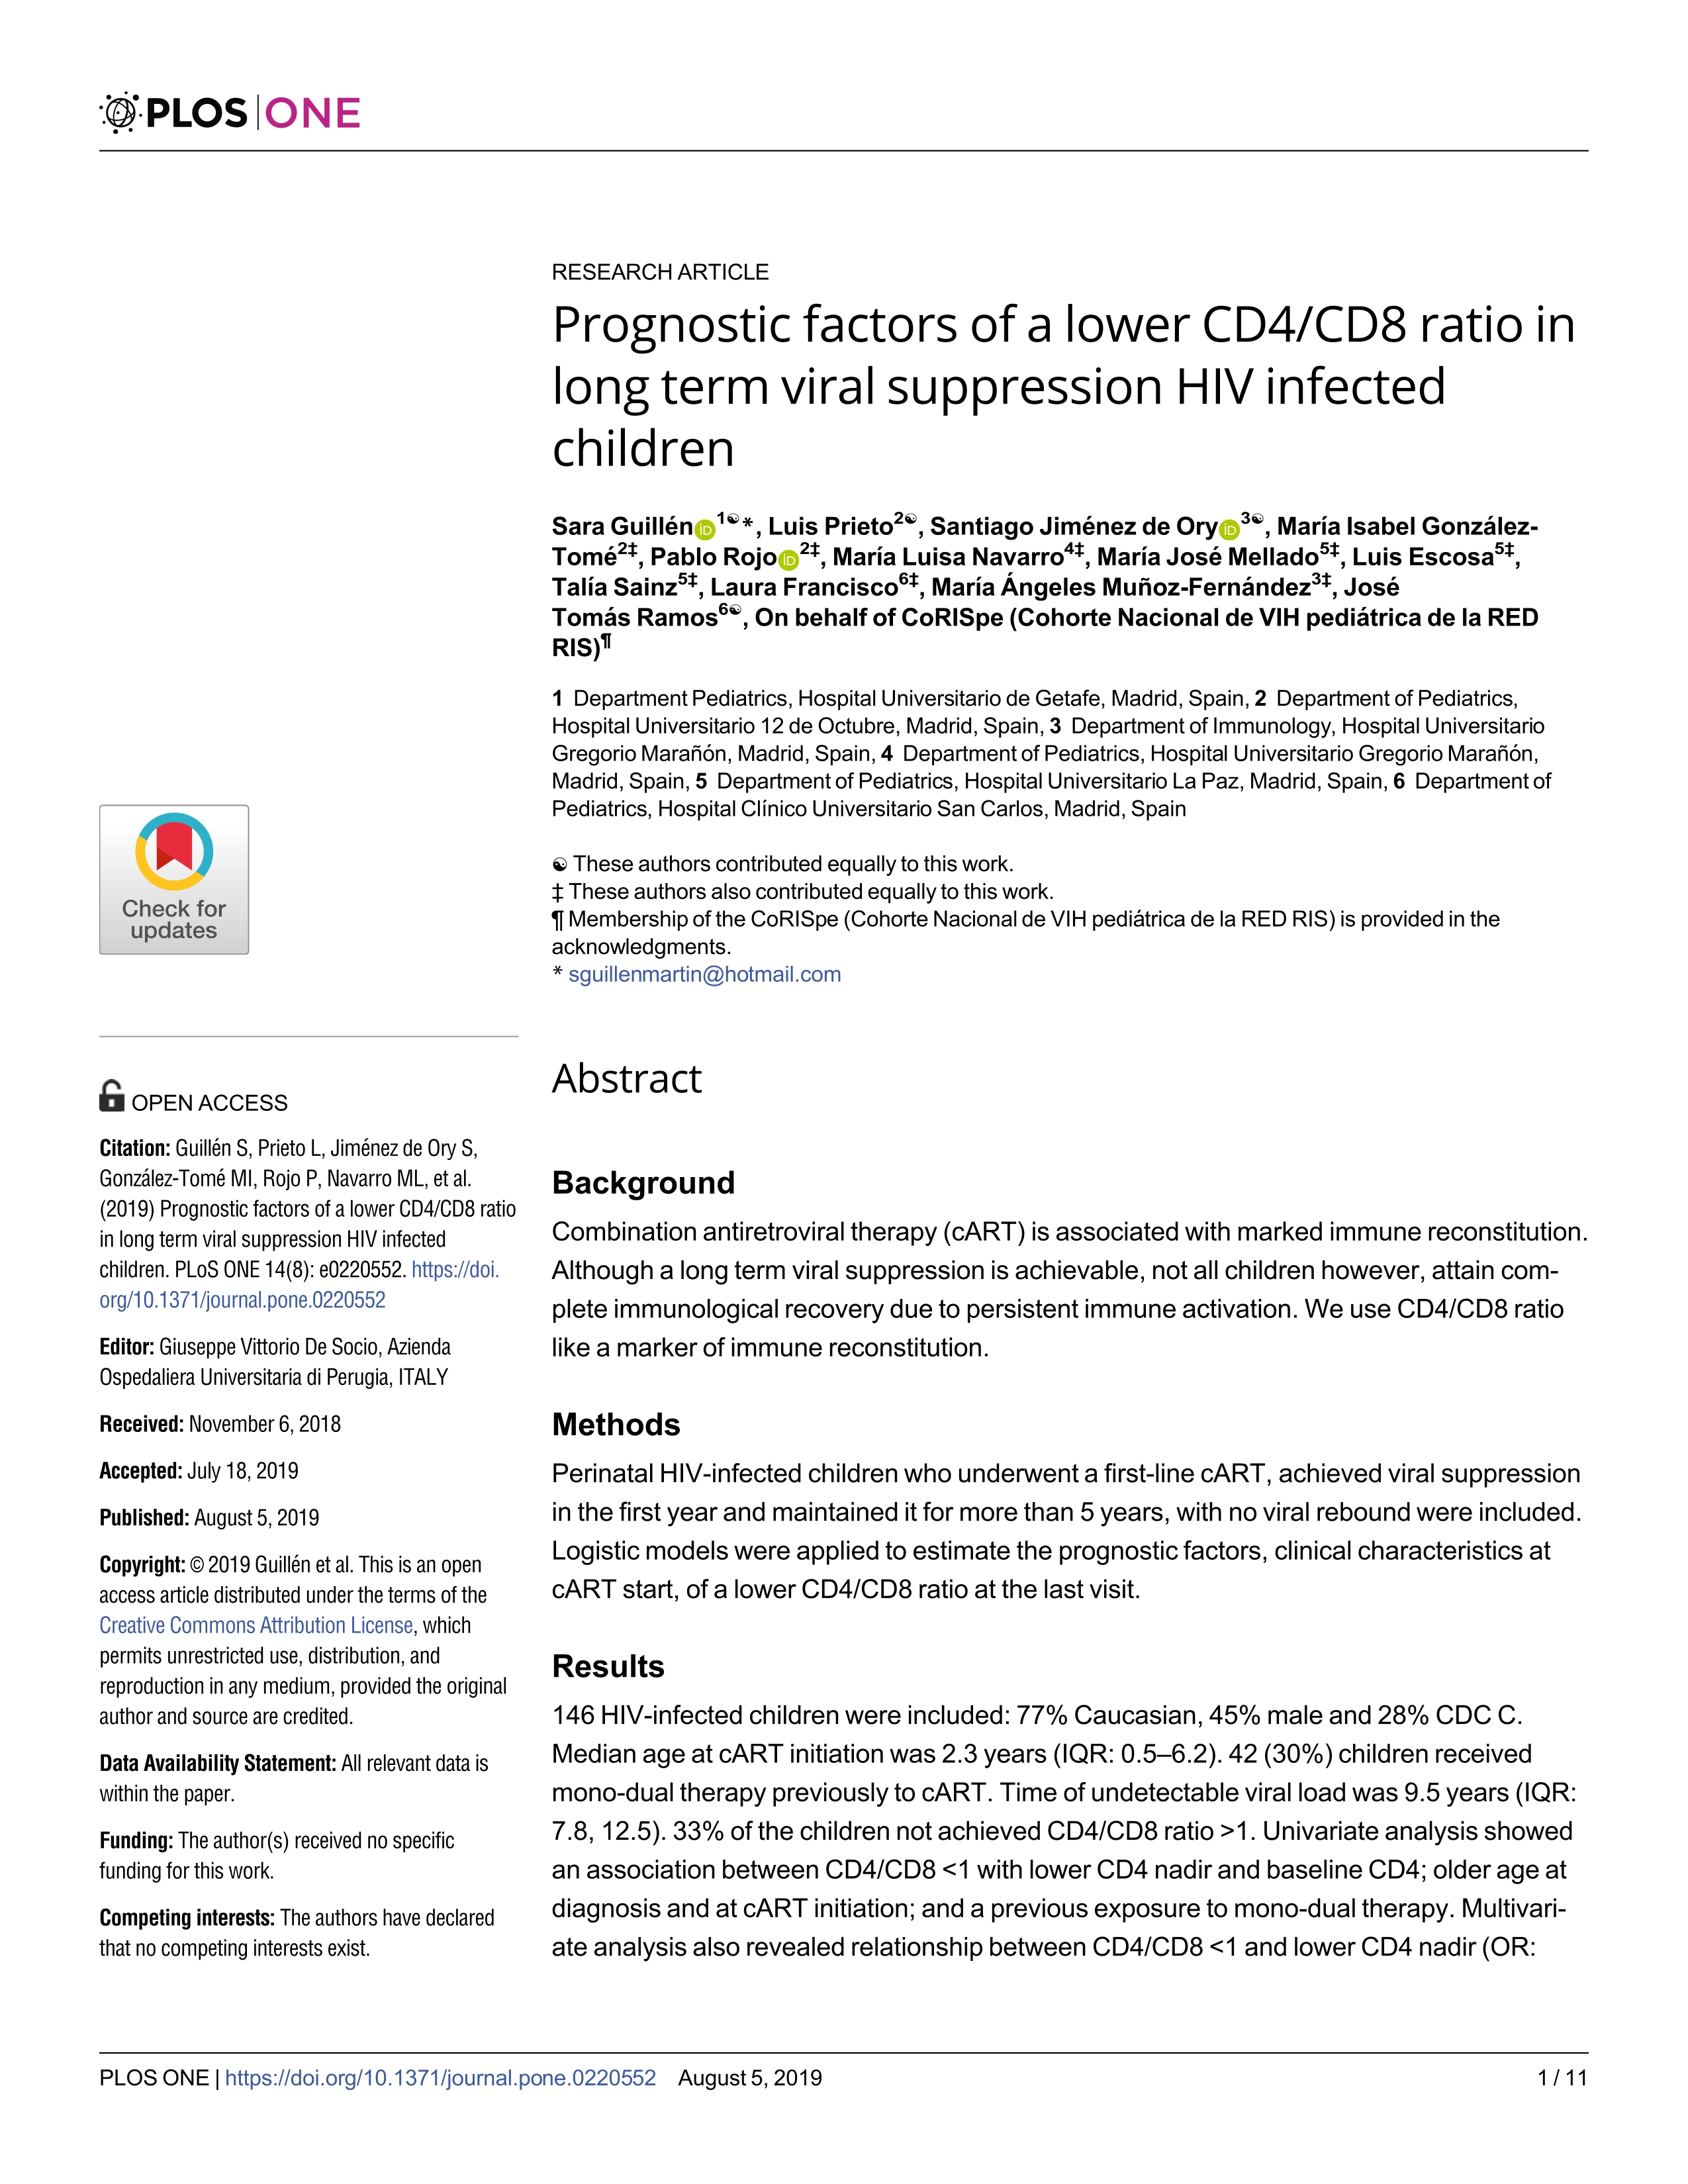 Prognostic factors of a lower CD4/CD8 ratio in long term viral suppression HIV infected children